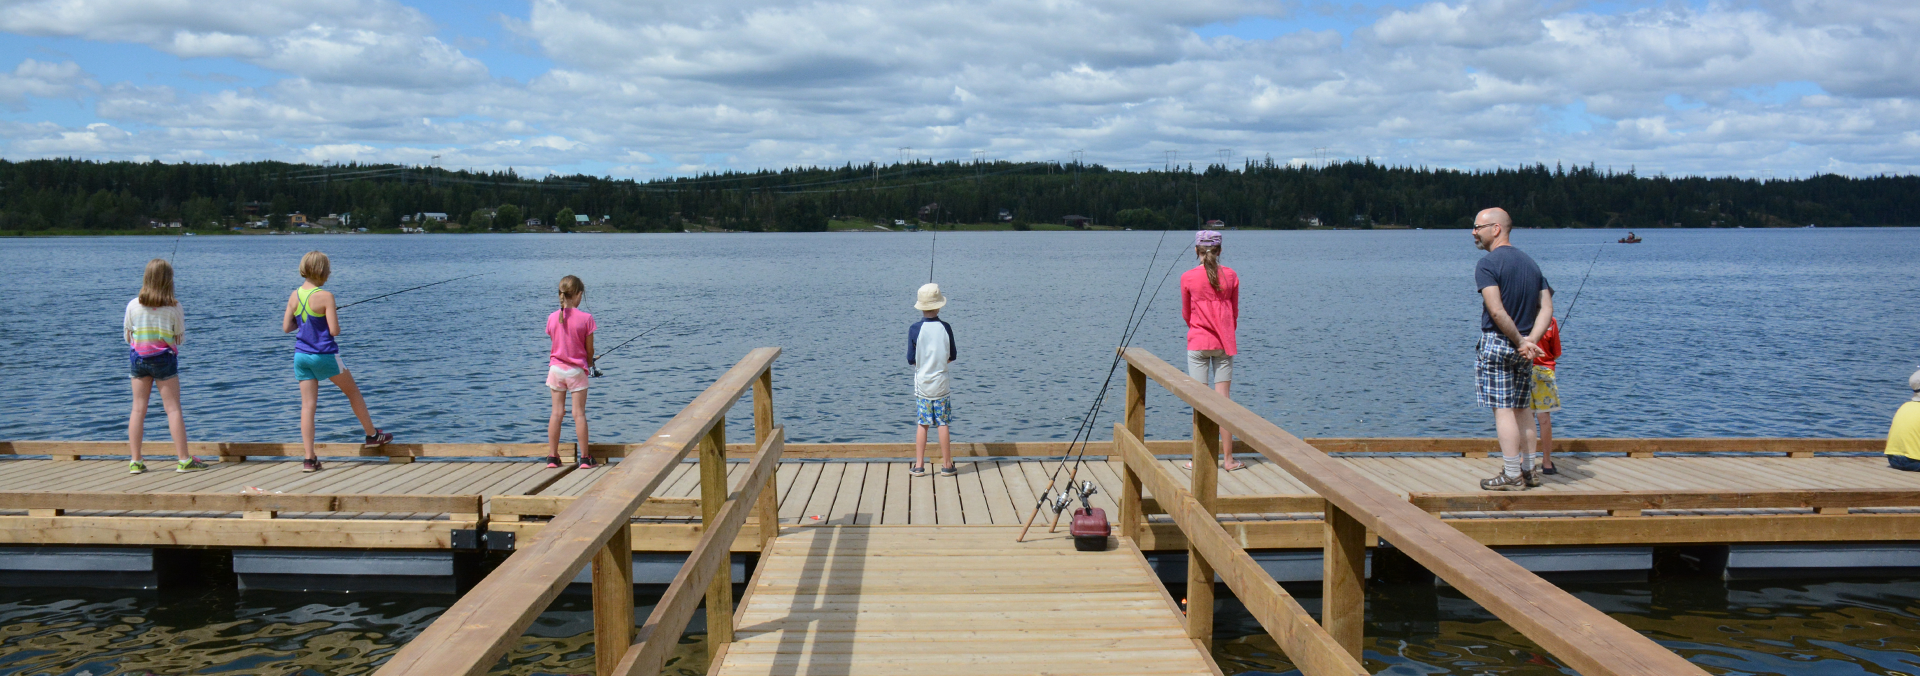 Tips for Shore and Dock Fishing Success - Freshwater Fisheries Society of BC